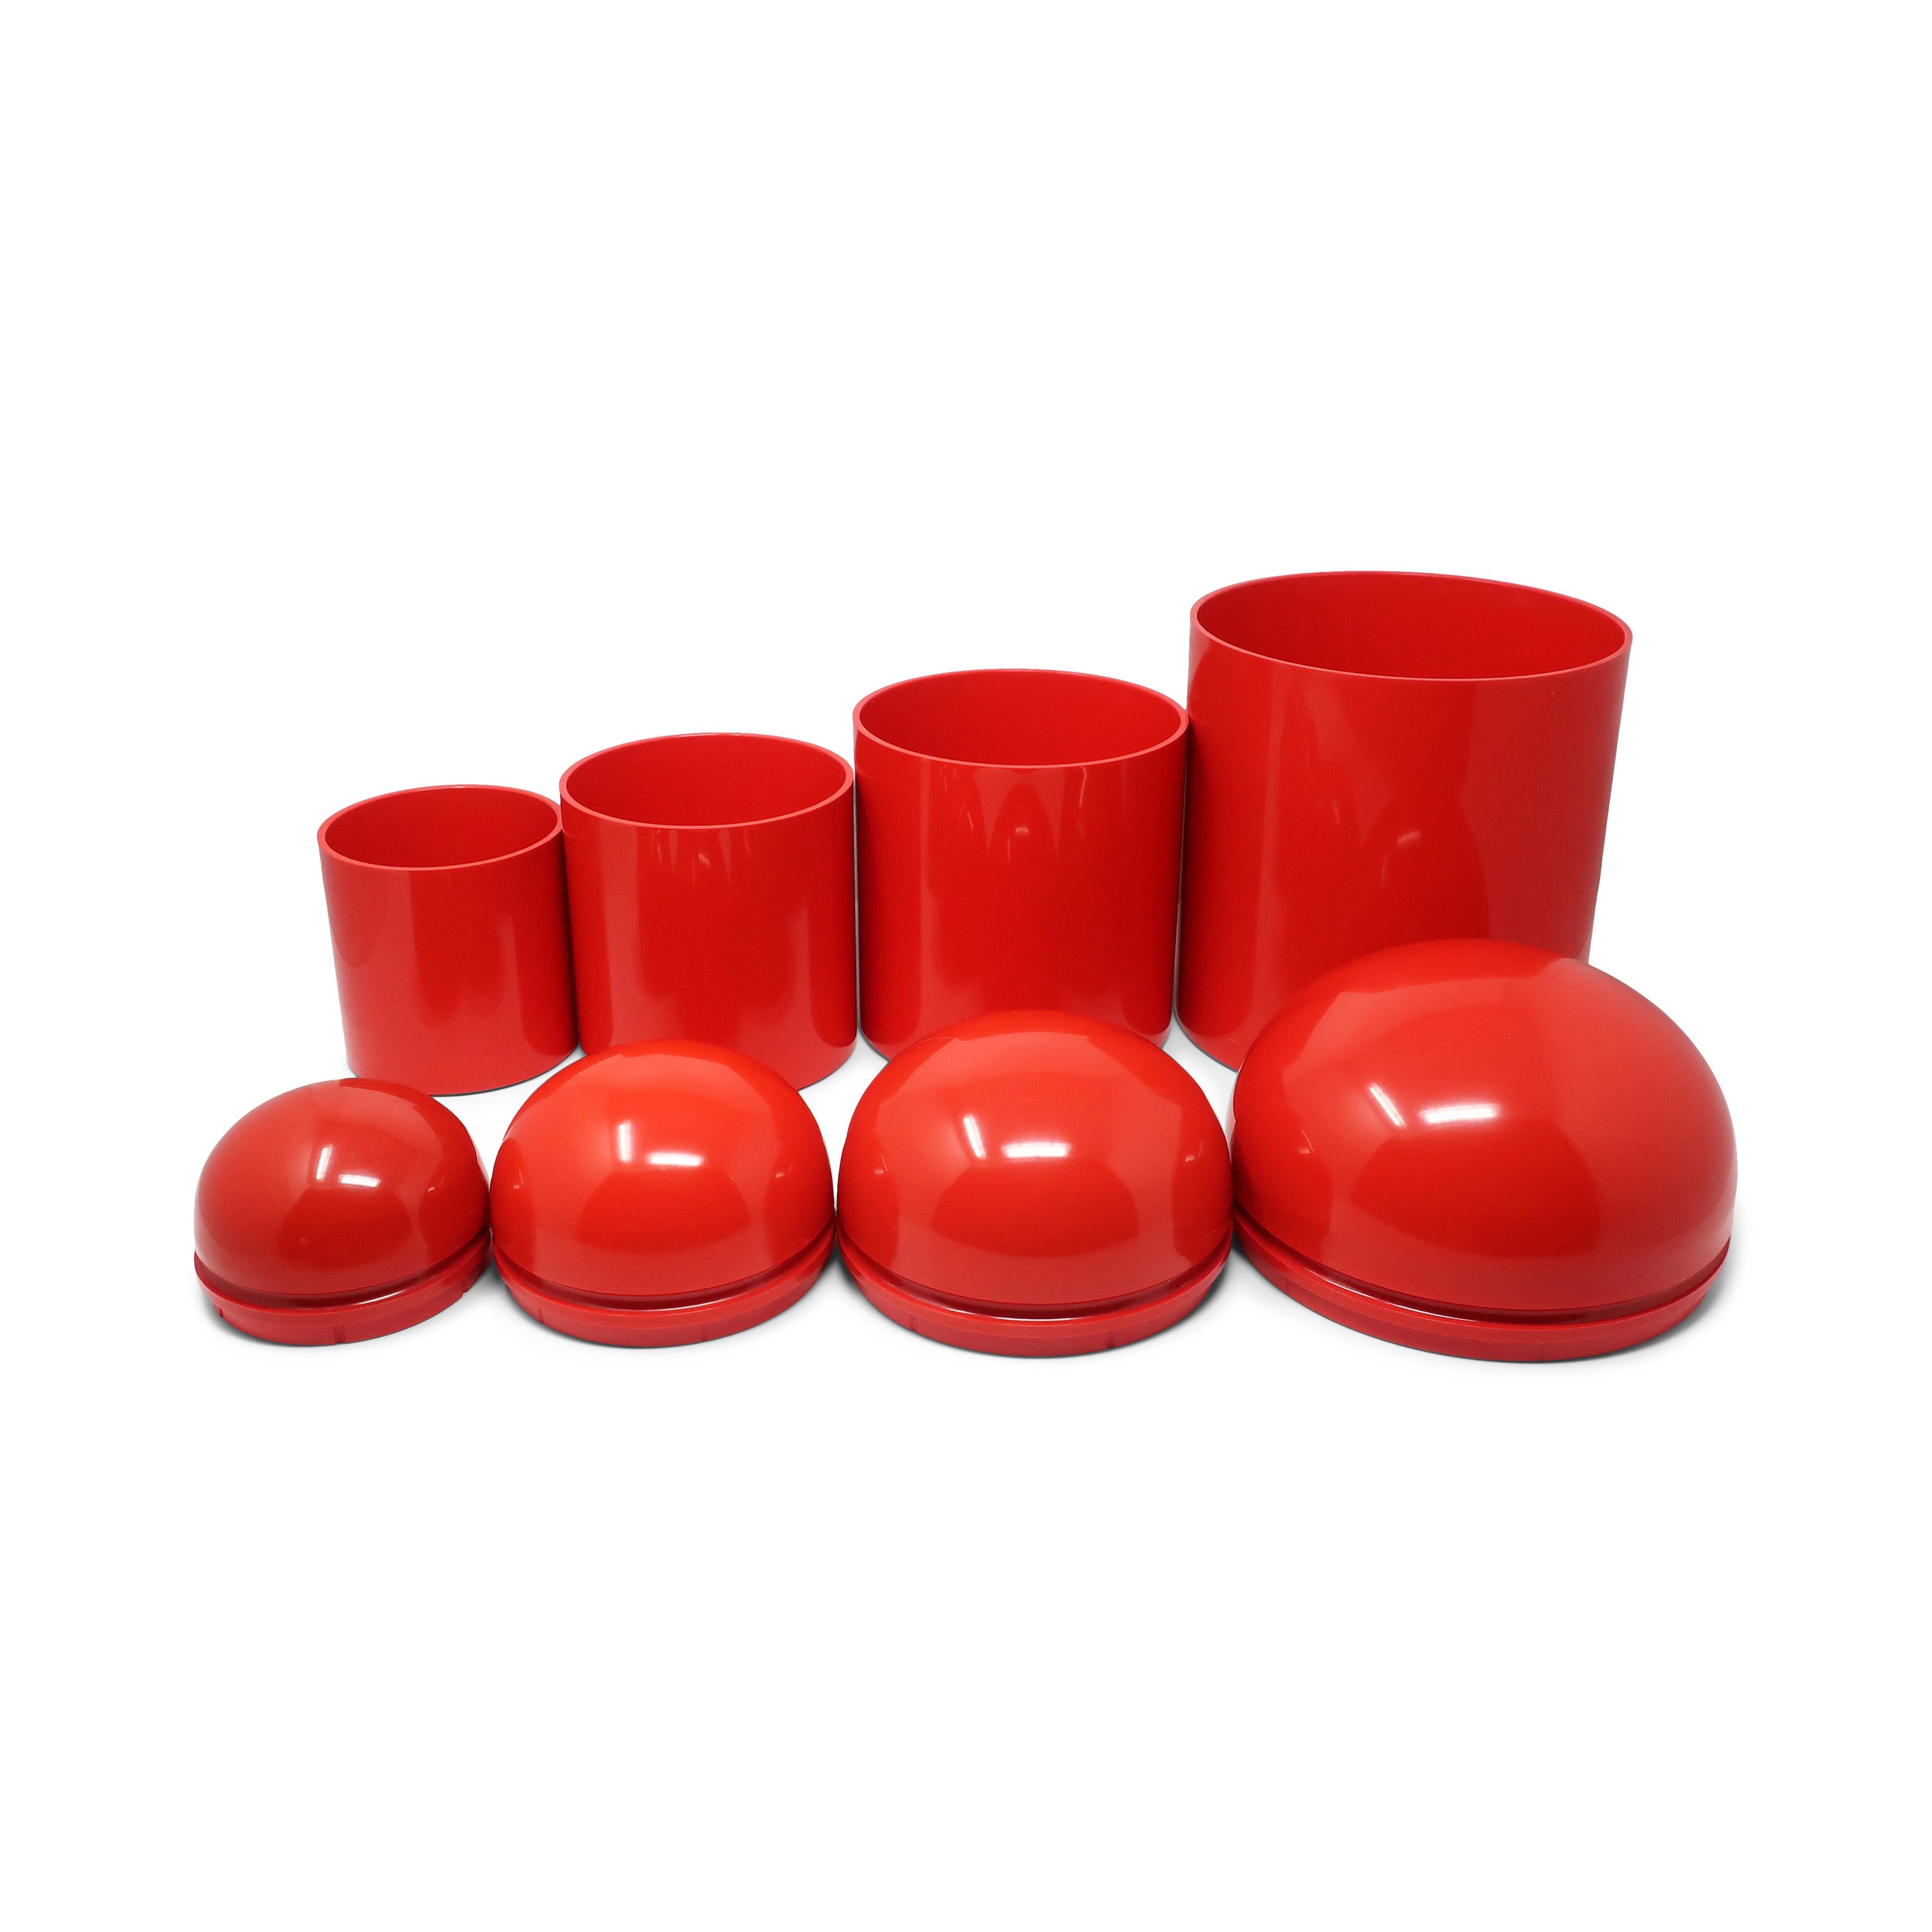 A fantastic and rare set of four 1970s nesting domed containers by Anna Castelli Ferrieri for Kartell in red.  The series was originally sold with cylindrical bases and domed lids as separate items, with both pieces made from injection molded ABS. 